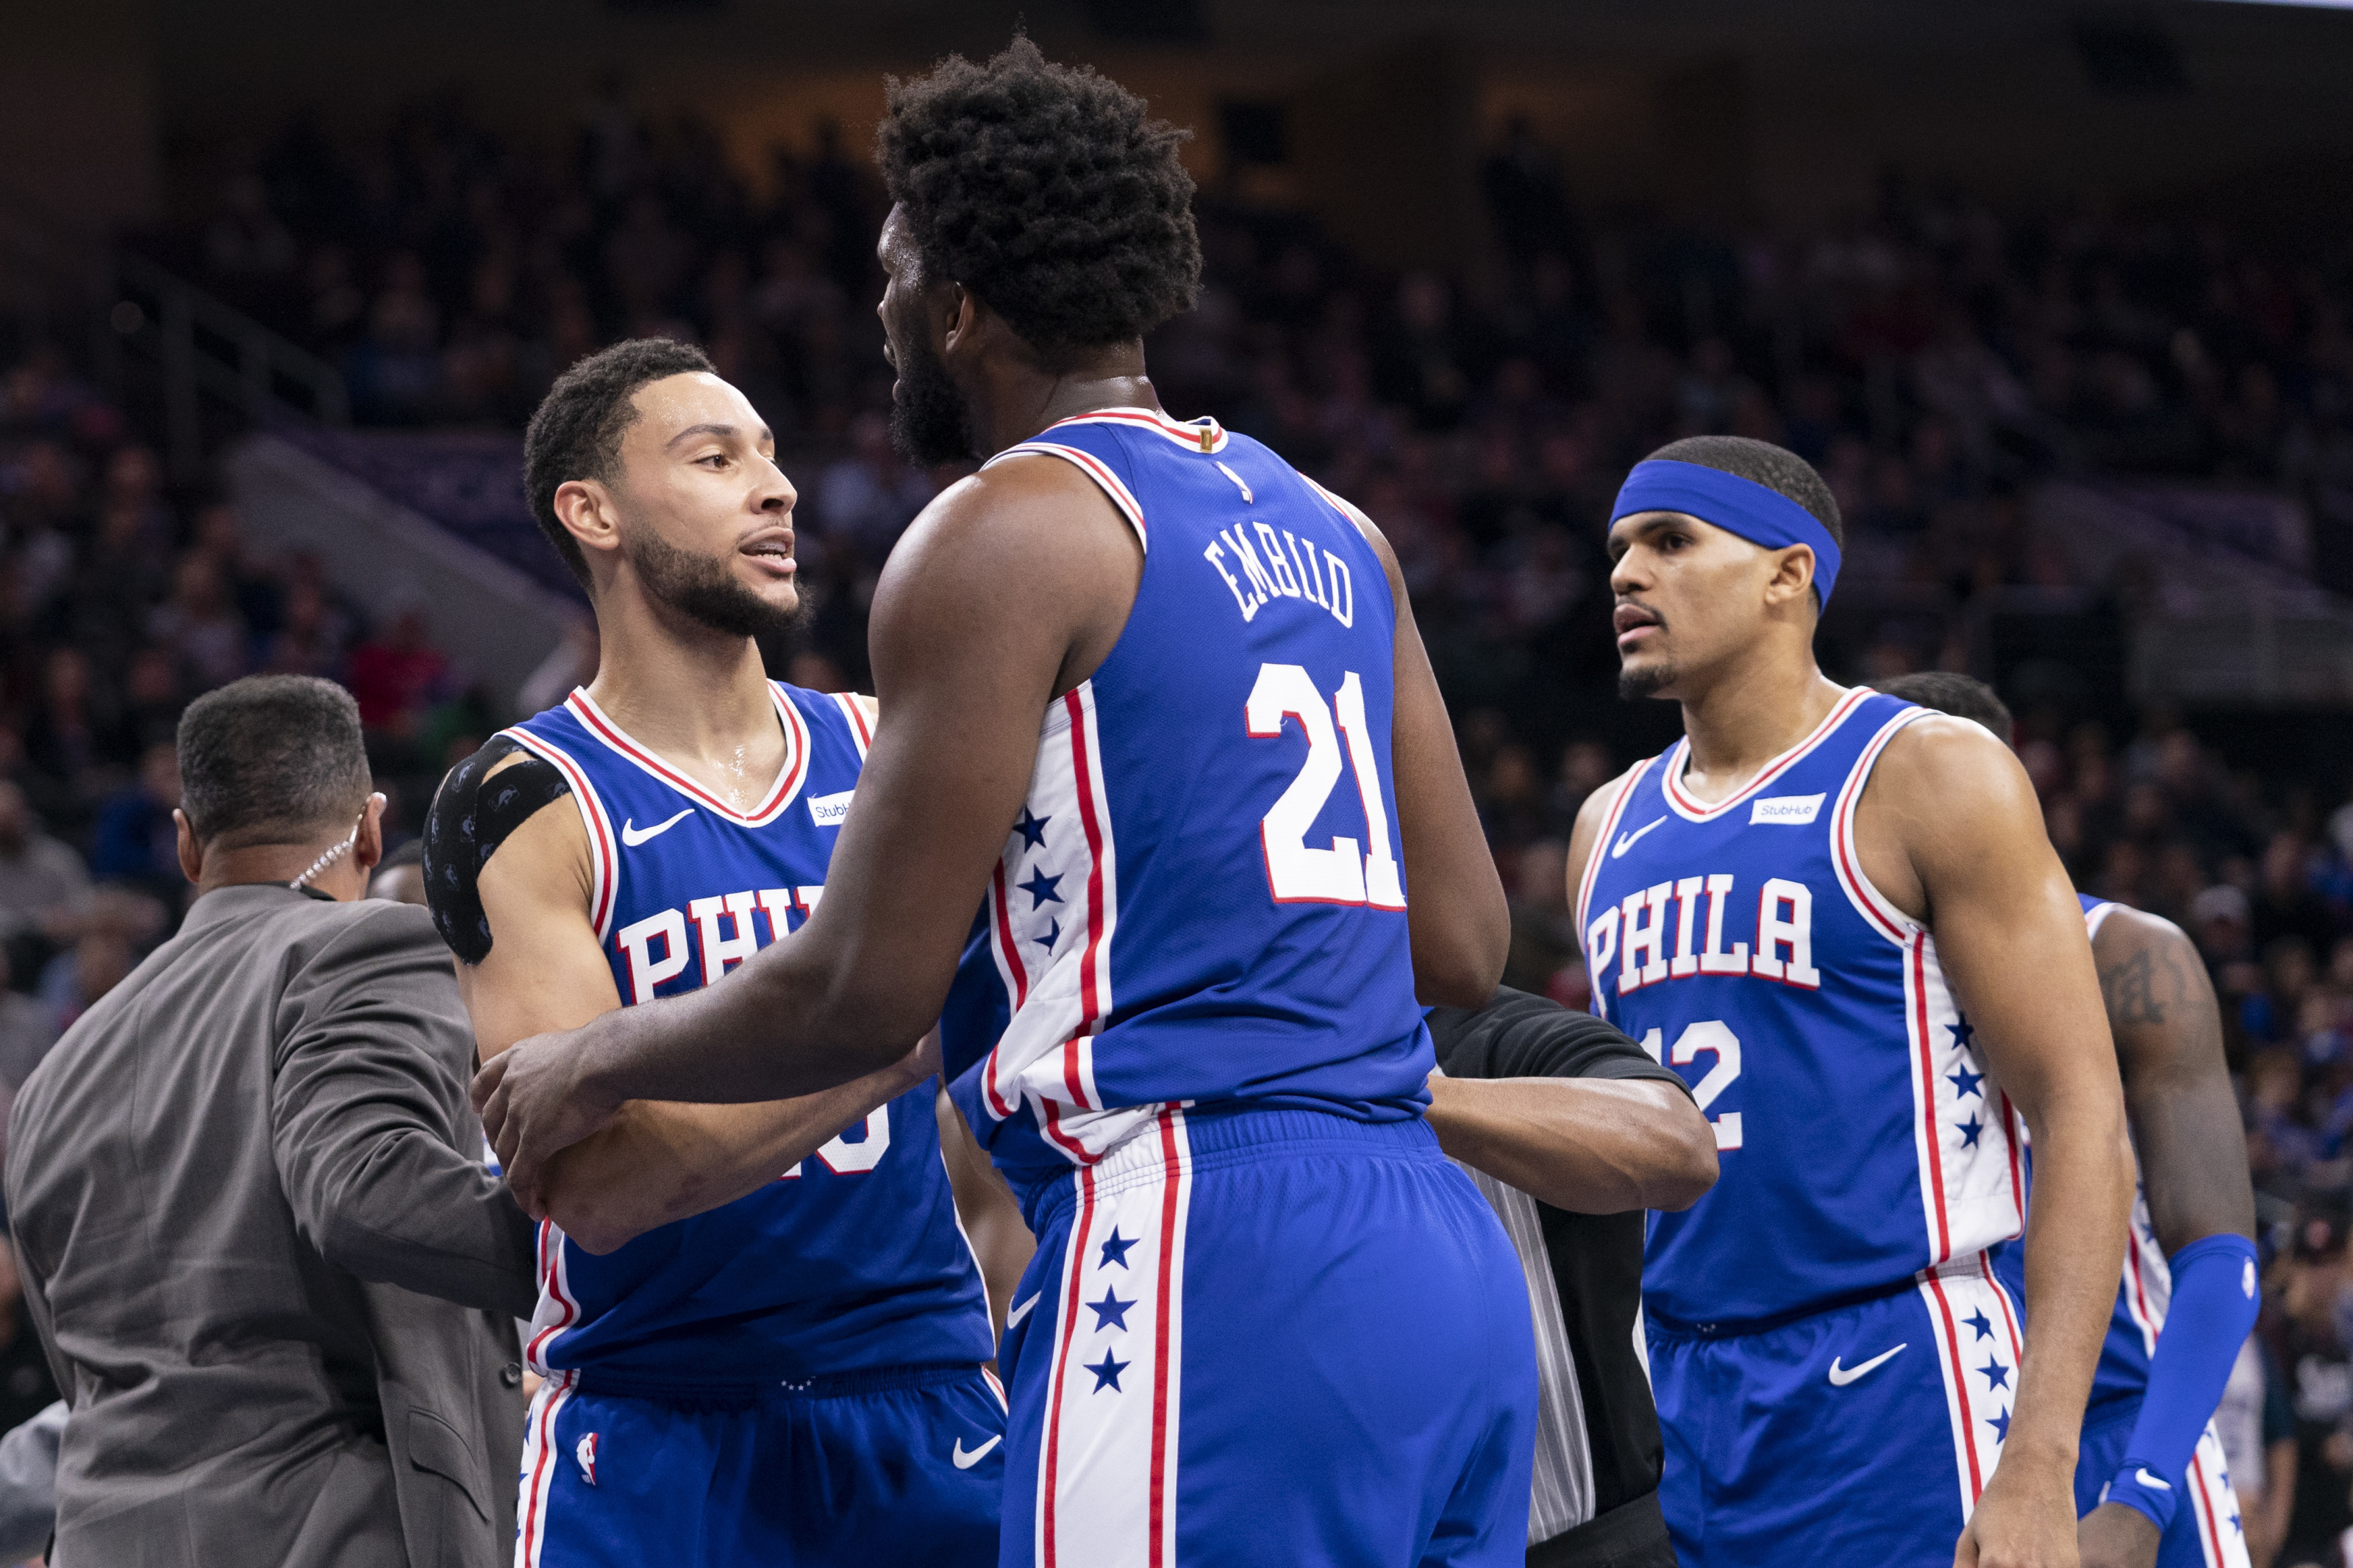 Ranking the top 5 Philadelphia 76ers rosters of all time